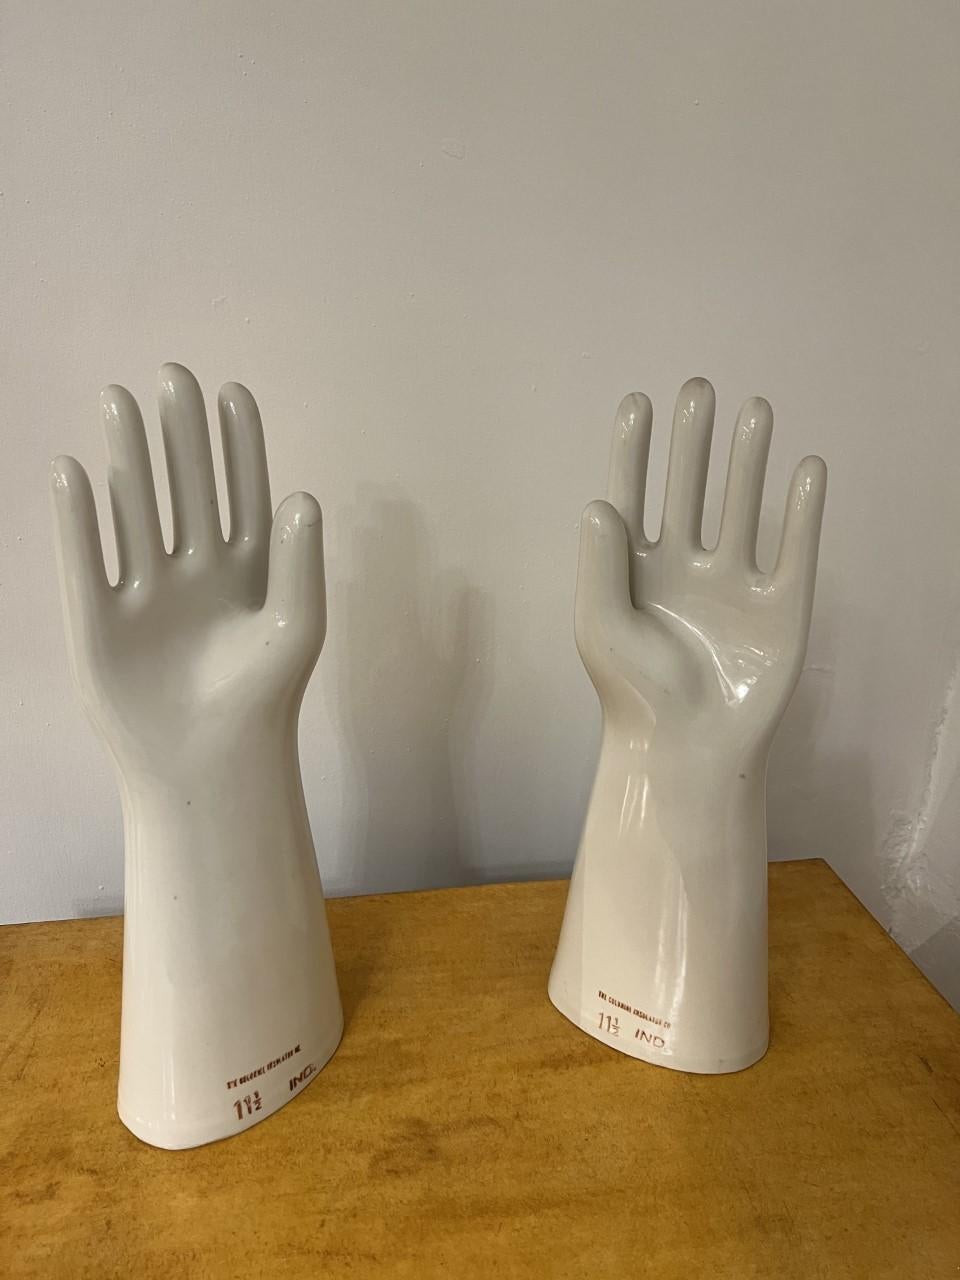 Art Deco Pair of Hands on Ceramics 'the Colonial Insulator Co' 11/1/2 Ind, Patent 22615 For Sale